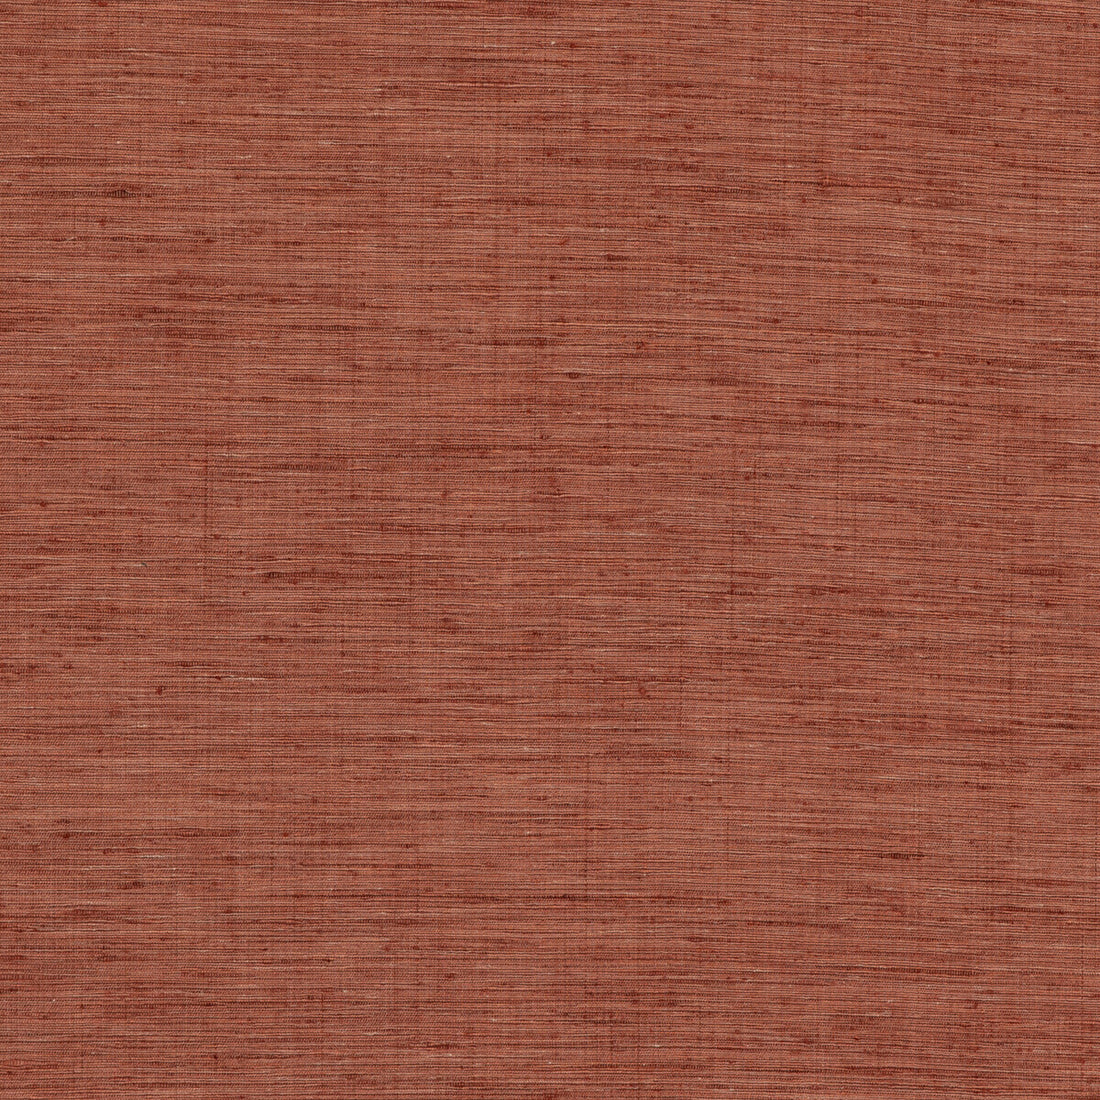 Belgrave fabric in spice color - pattern PF50477.330.0 - by Baker Lifestyle in the Pavilion - Blegrave Notebook collection